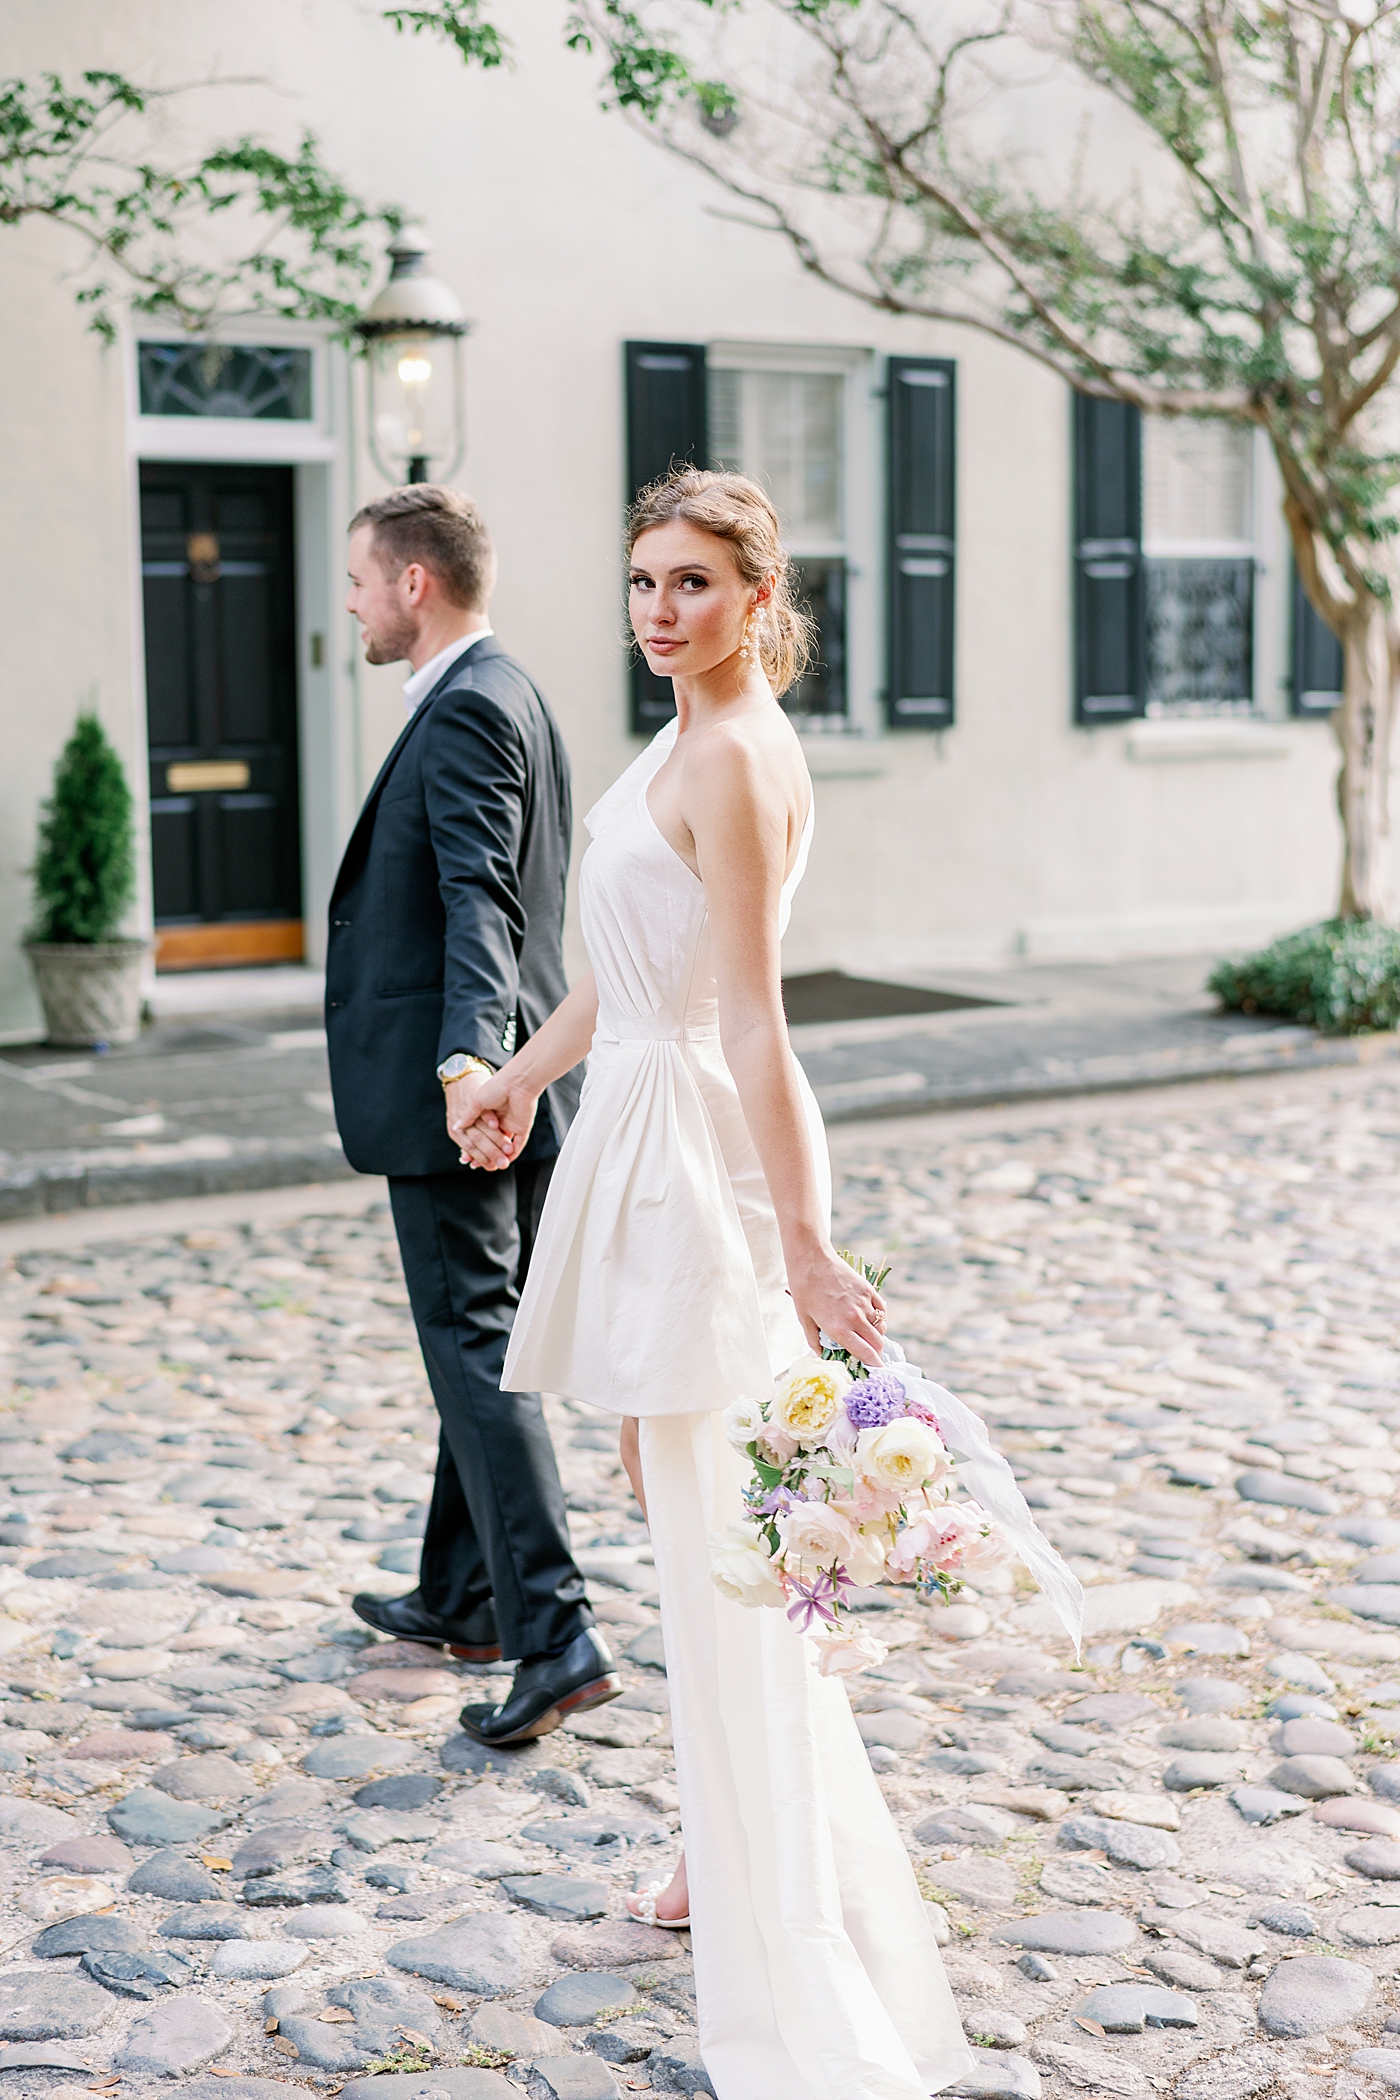 Bride and groom walking on cobblestone st | Images by Annie Laura Photo